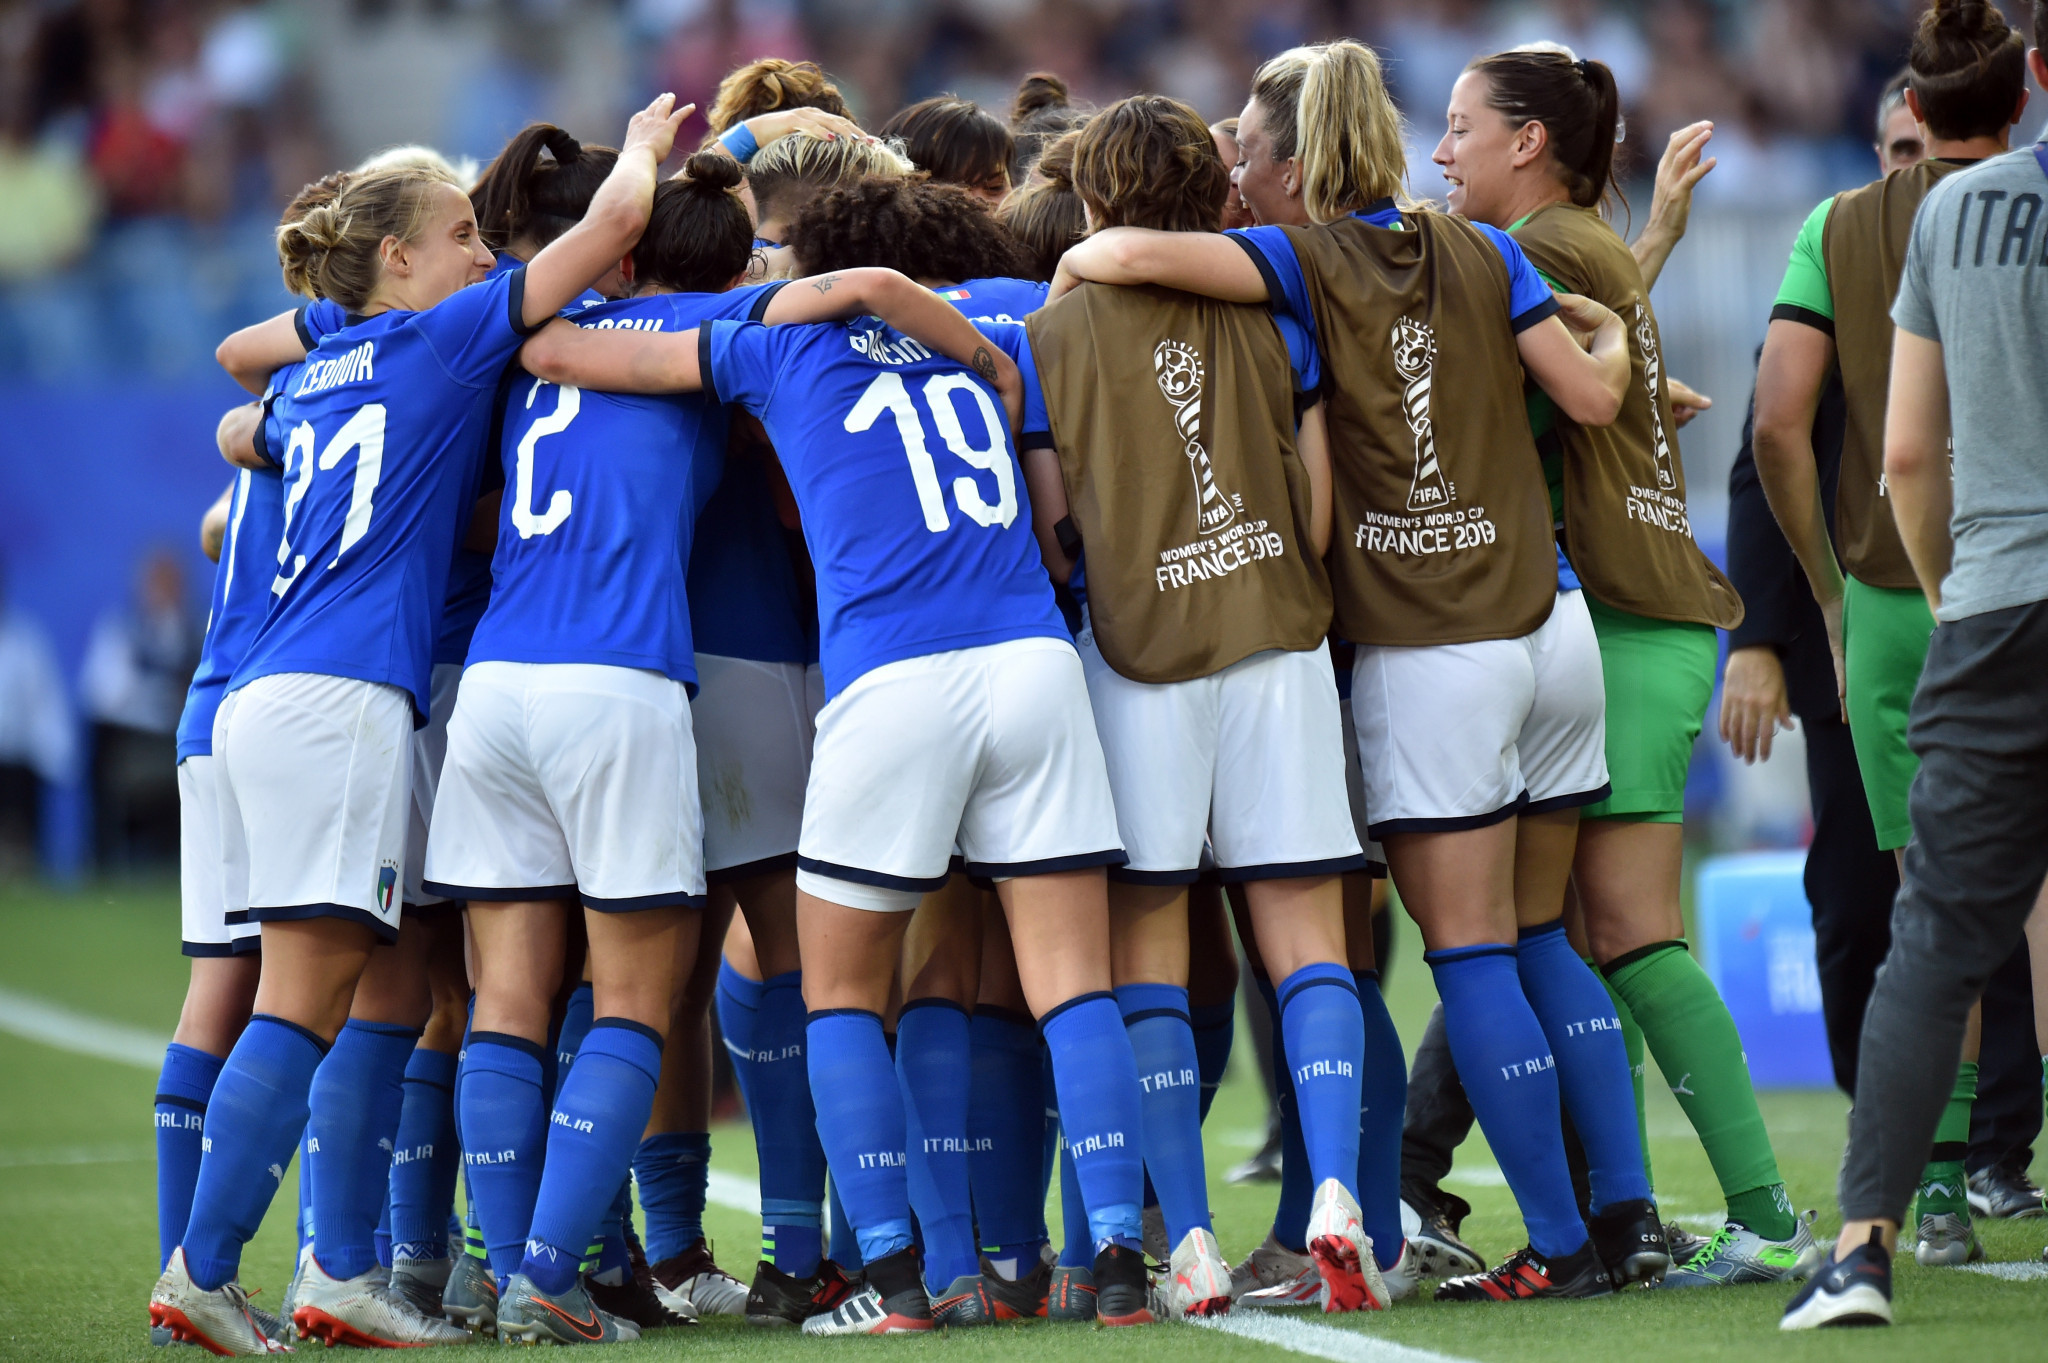 Italy are through to the quarter-finals of the FIFA Women's World Cup after beating China 2-0 in Montpellier ©Getty Images